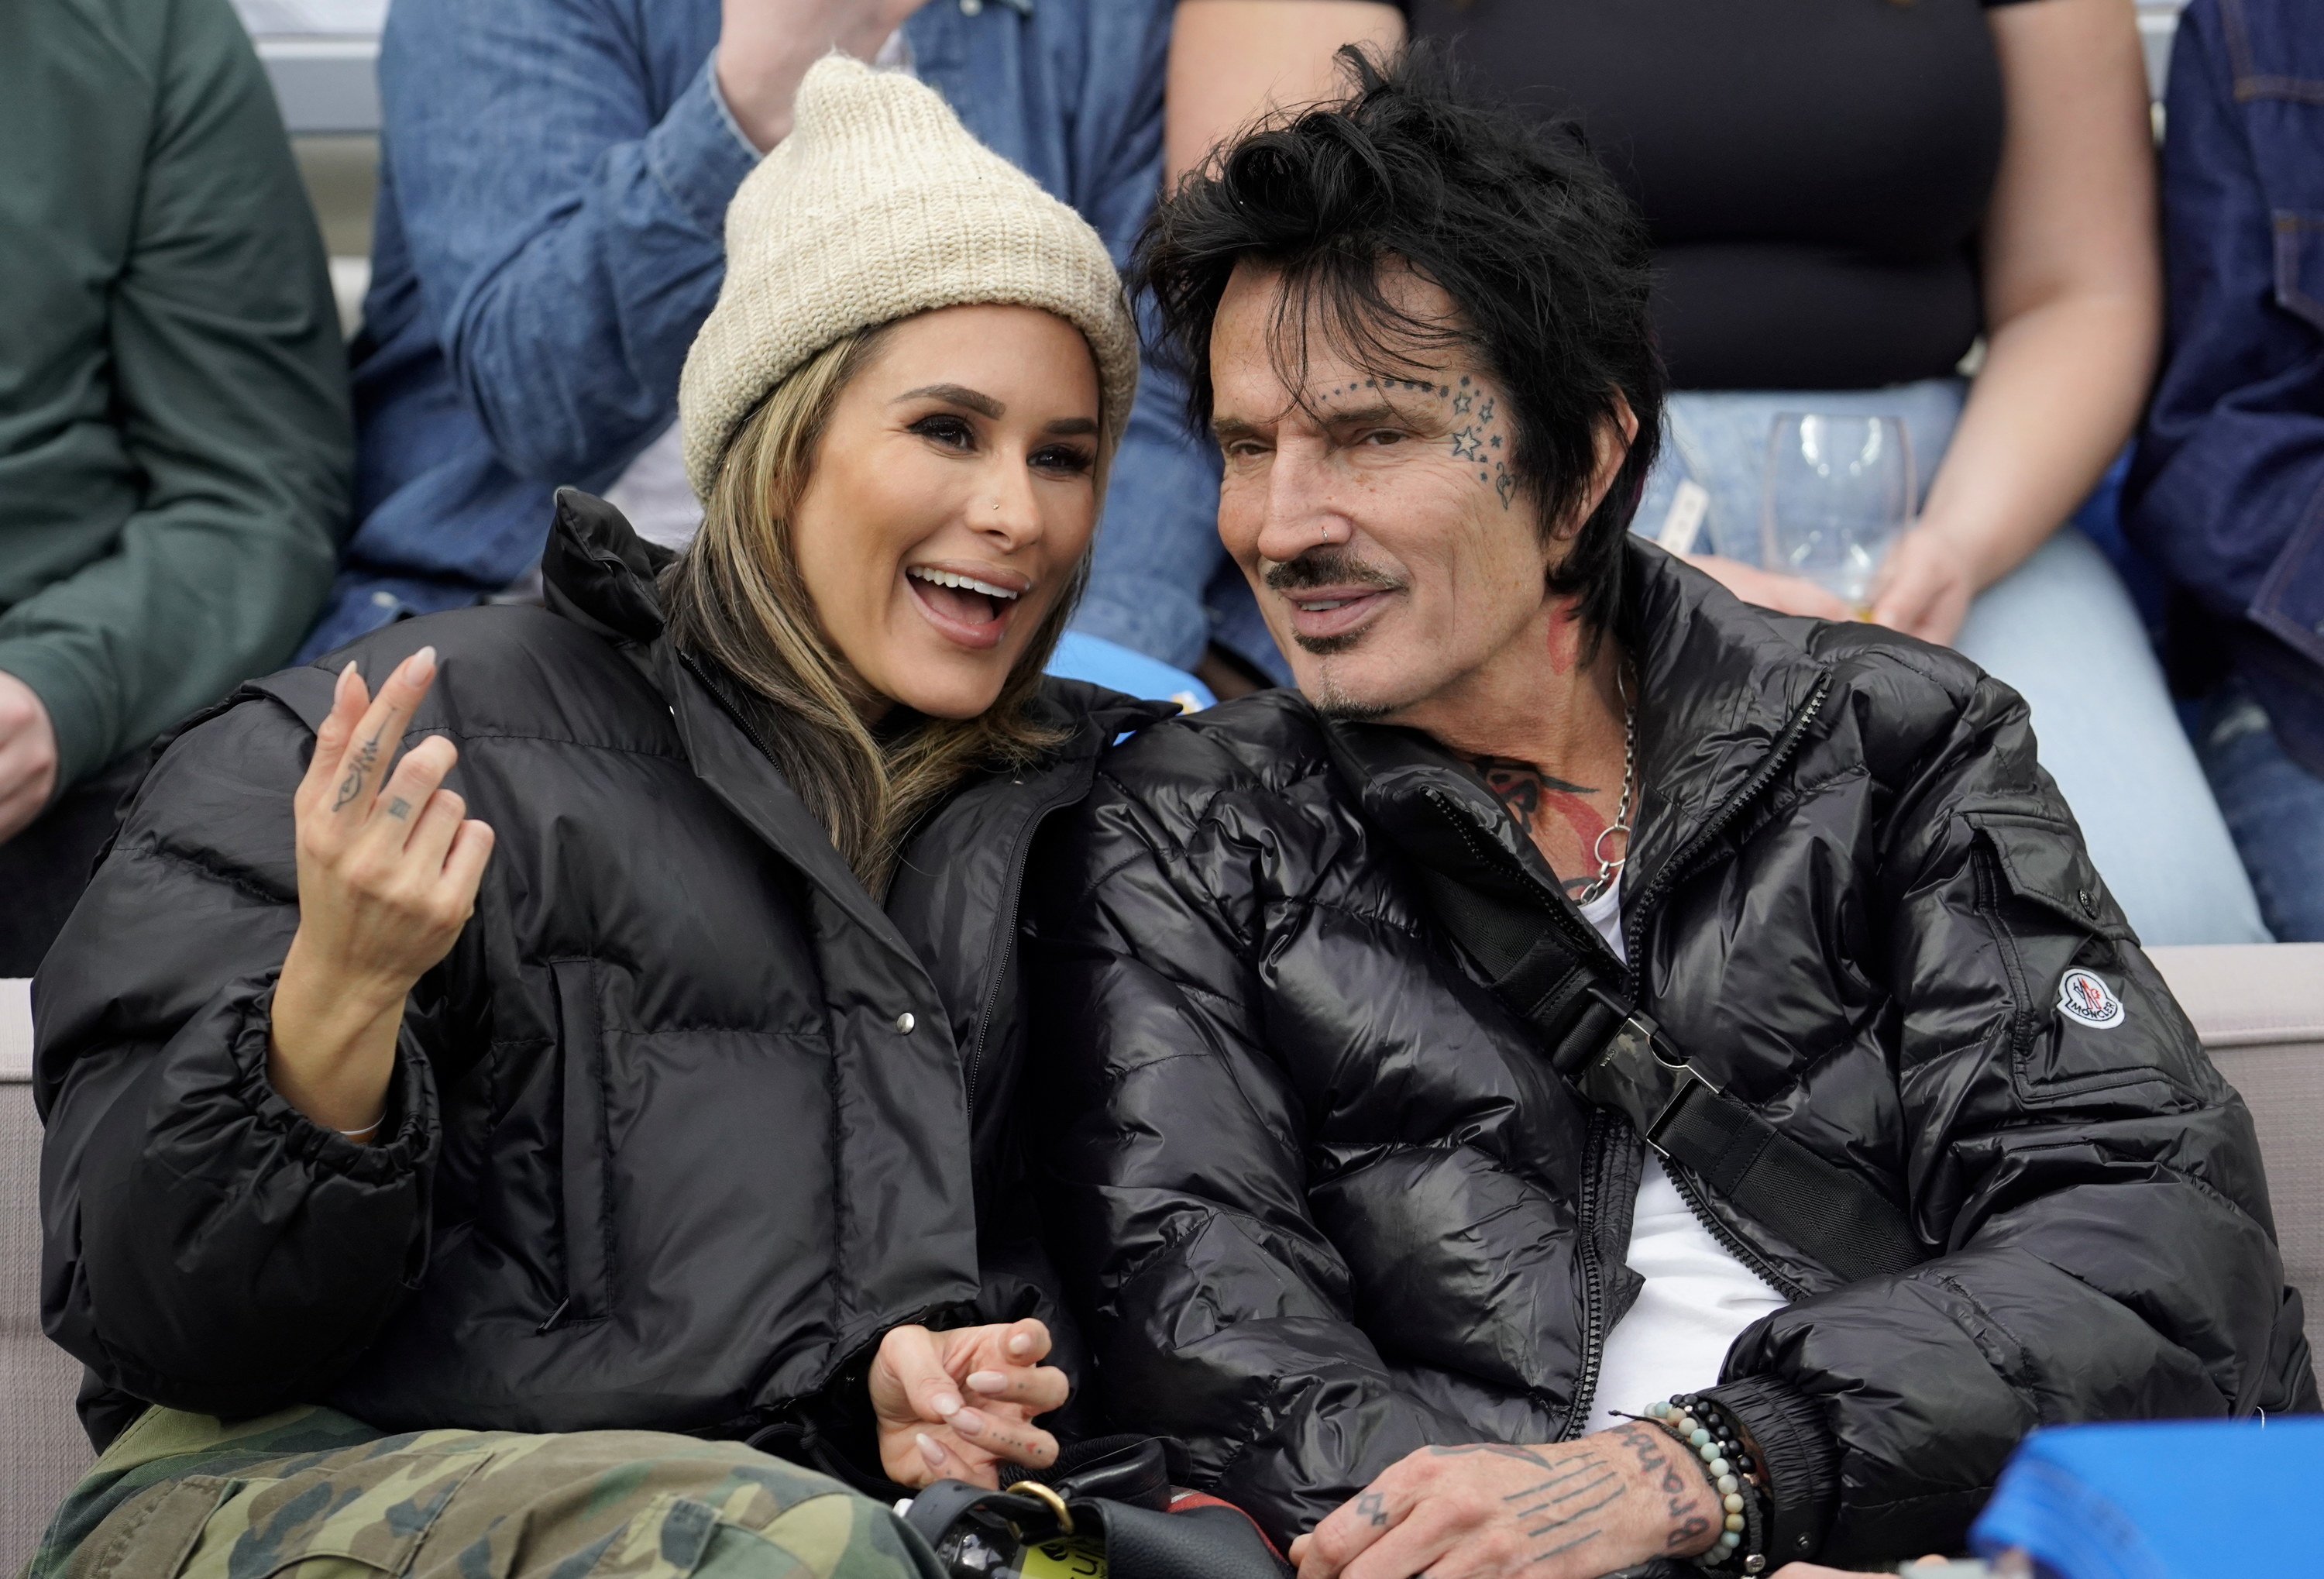 Closeup of Brittany Furlan and Tommy Lee